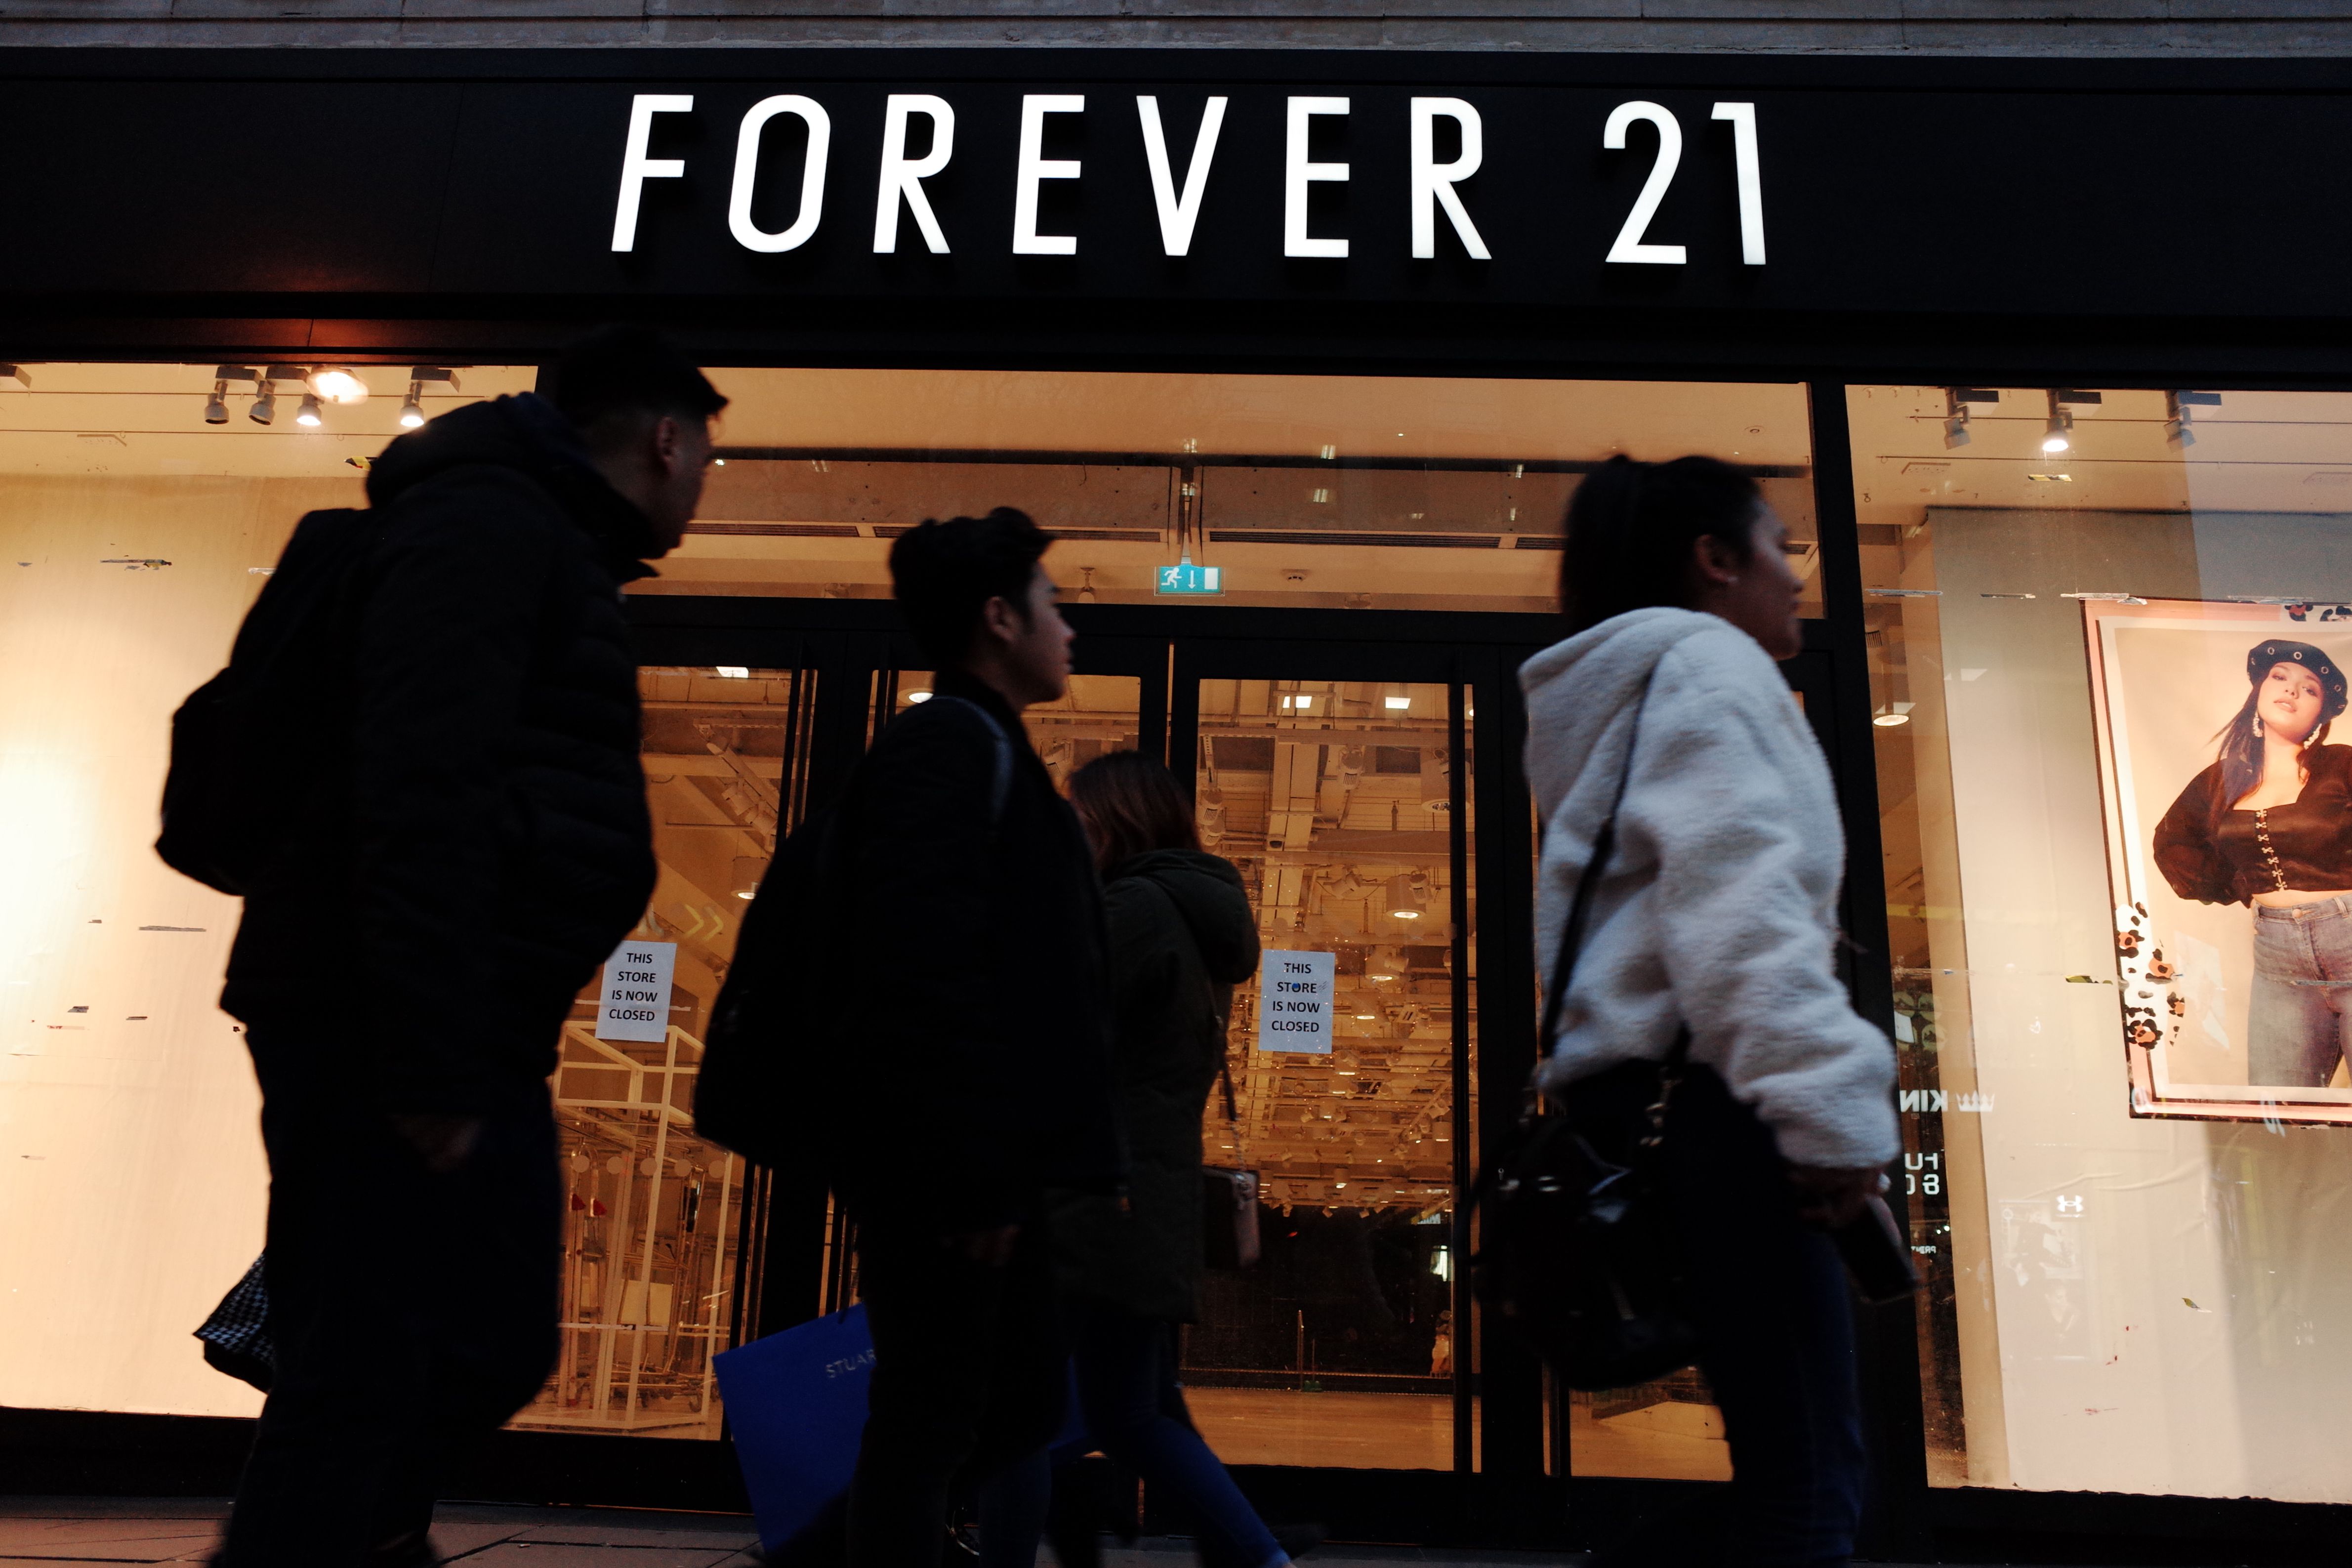 Mall owners are among group bidding $81M for Forever 21